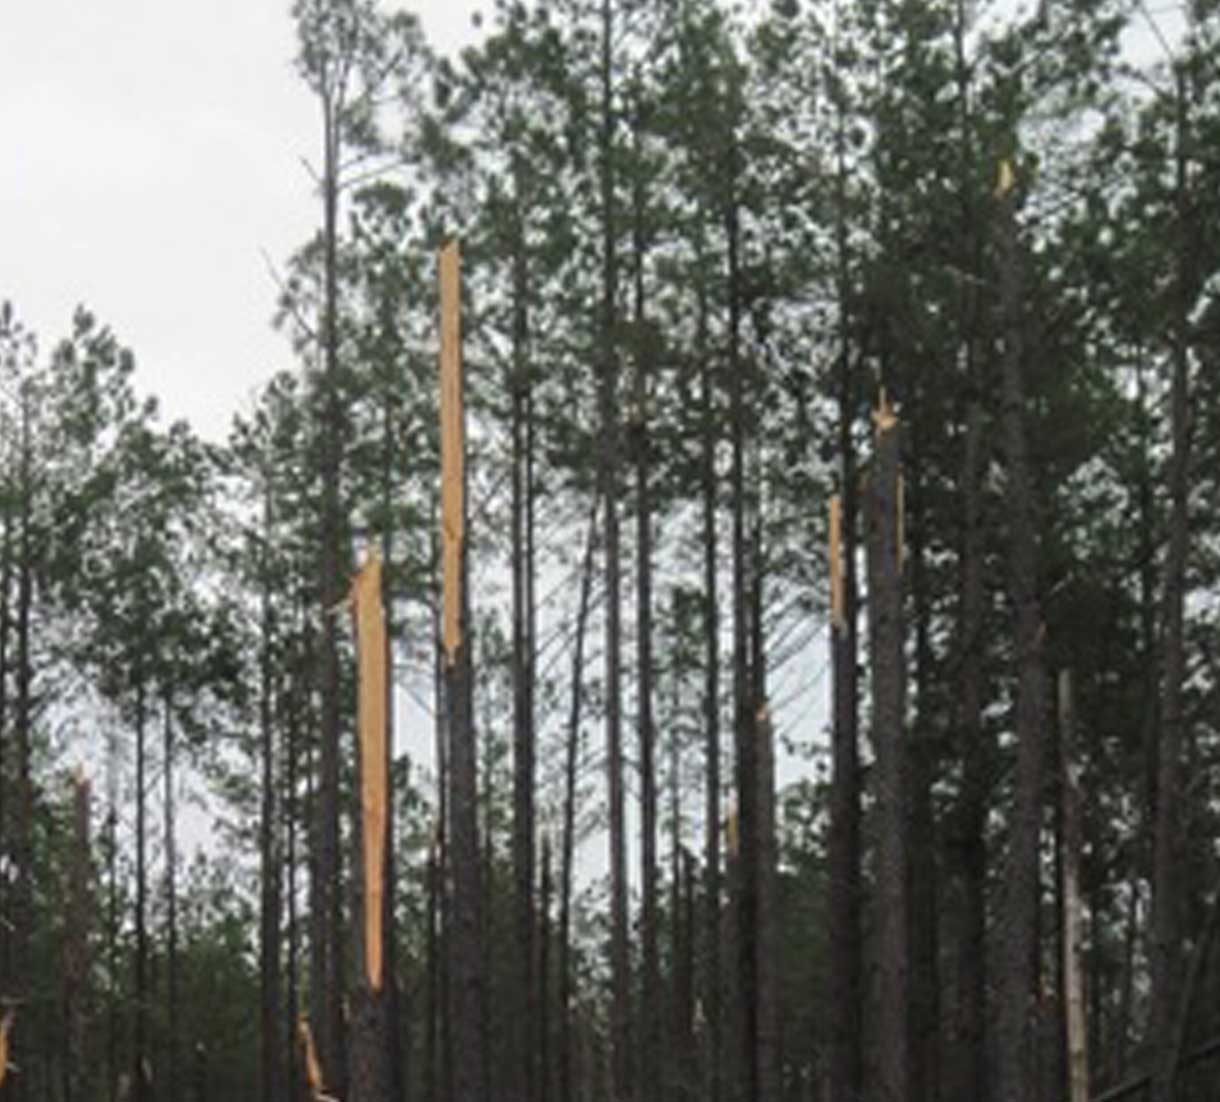 A severe ice storm that struck Georgia during the week of Feb. 11-13, 2014 damaged about 70,000 acres of pine trees near Augusta. The ice also knocked out power to thousands of homes in the area and sent about 100,000 cubic yards of tree limbs plummeting into people yards.